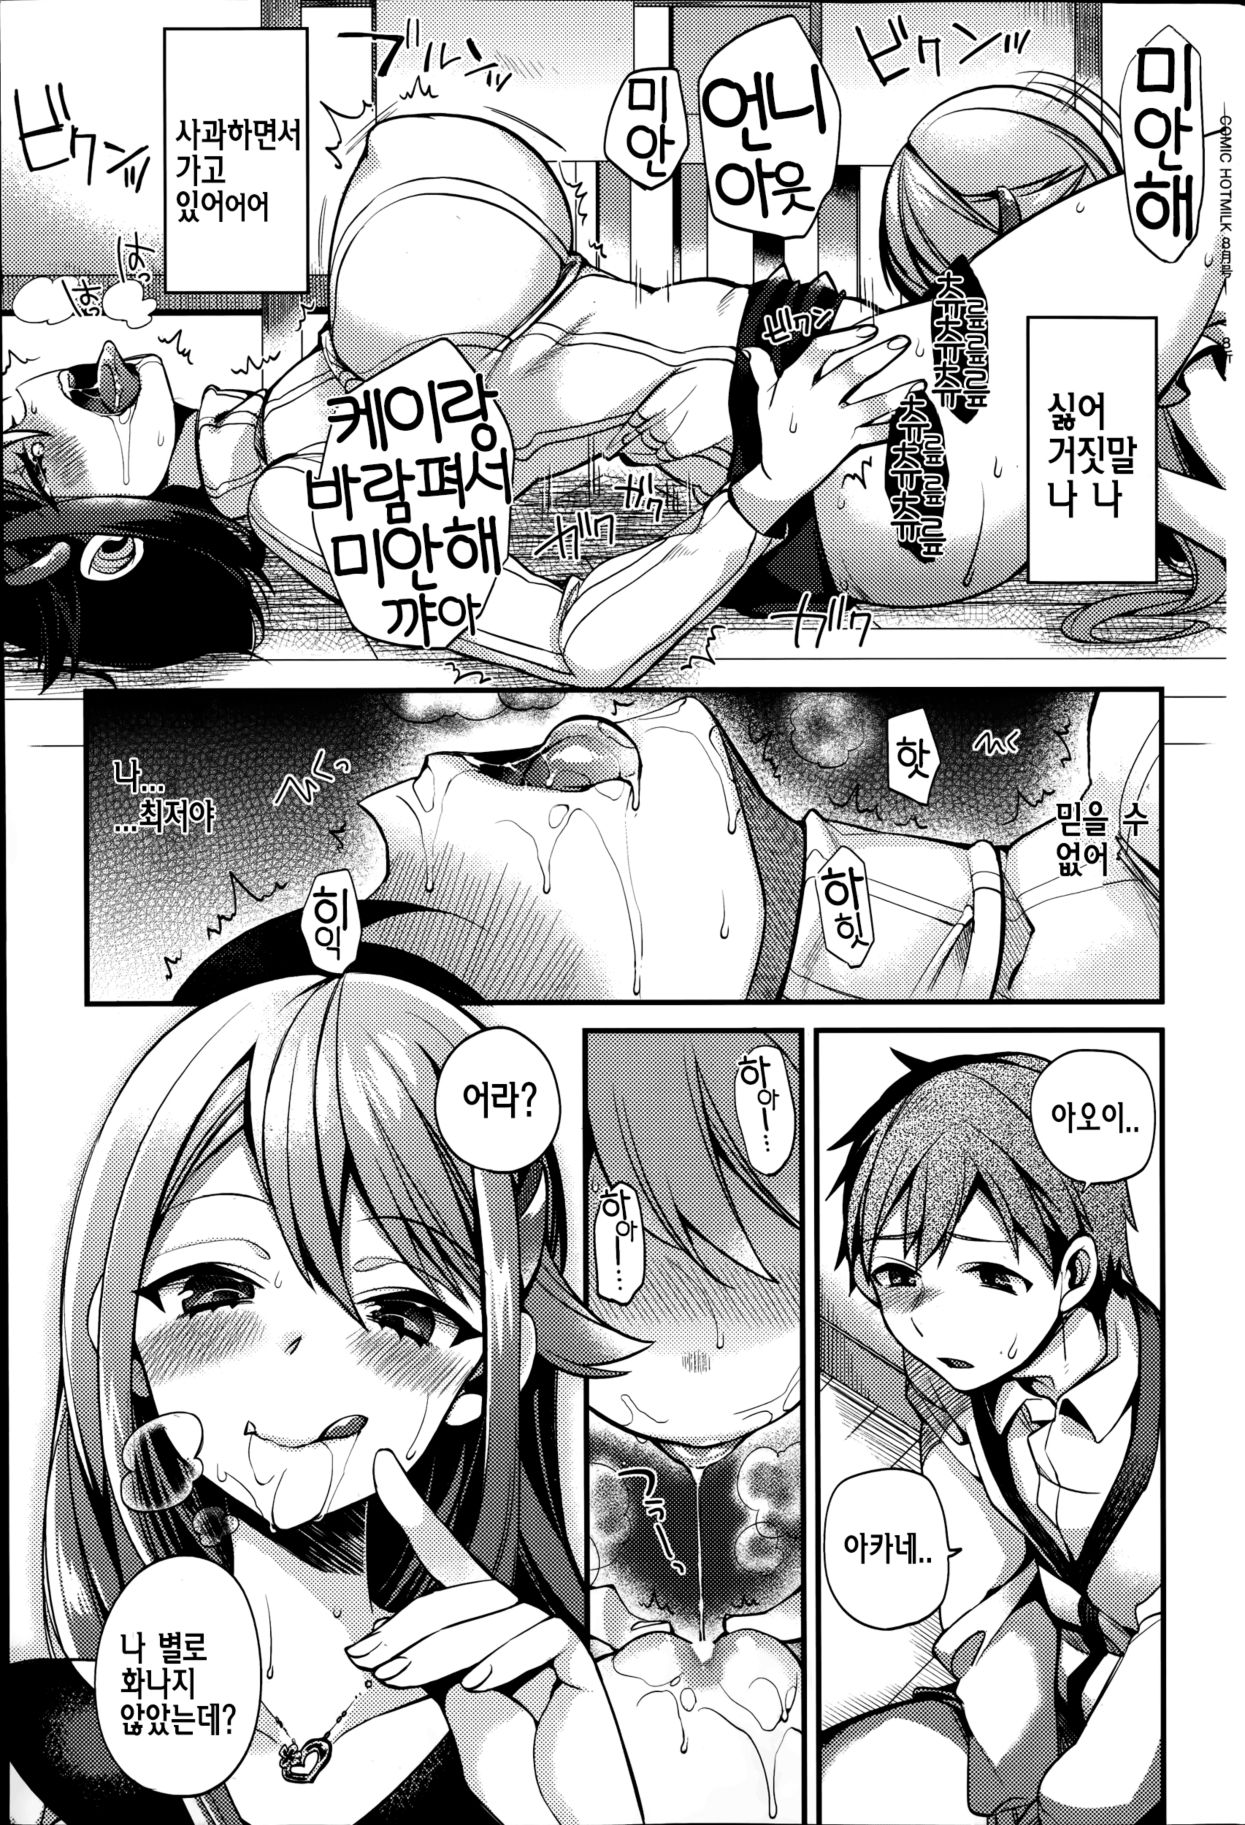 [Shindou] Sisters Conflict Ch.2 (Comic Hotmilk 2014-08) [Korean] {Regularpizza} [しんどう] Sisters Conflict 第2章 (コミックホットミルク 2014年8月号) [韓国翻訳]